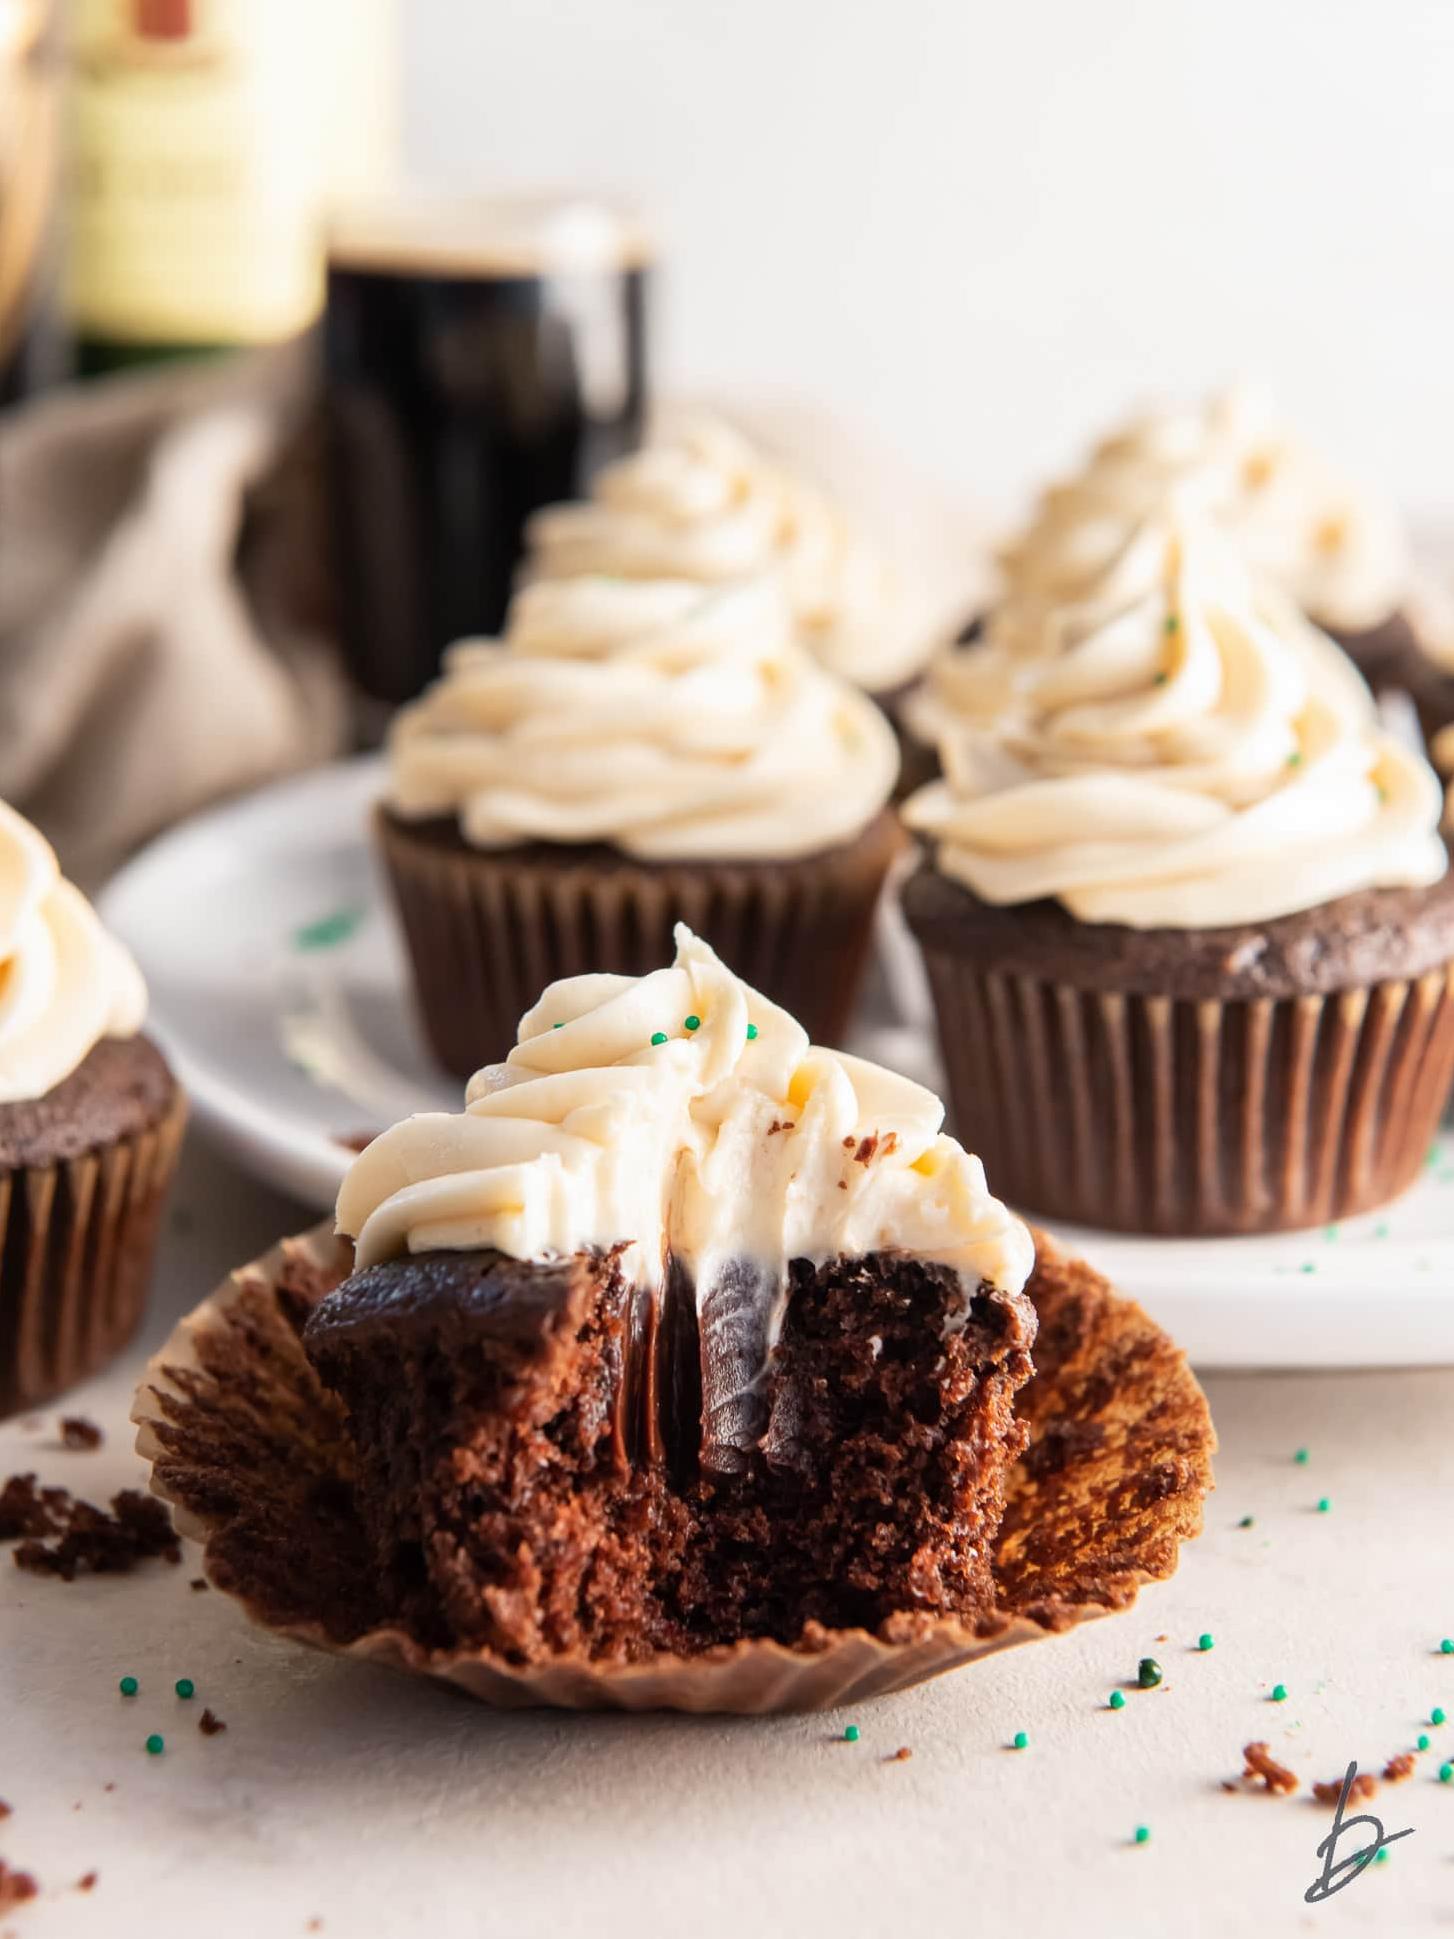  These cupcakes are too good to resist!